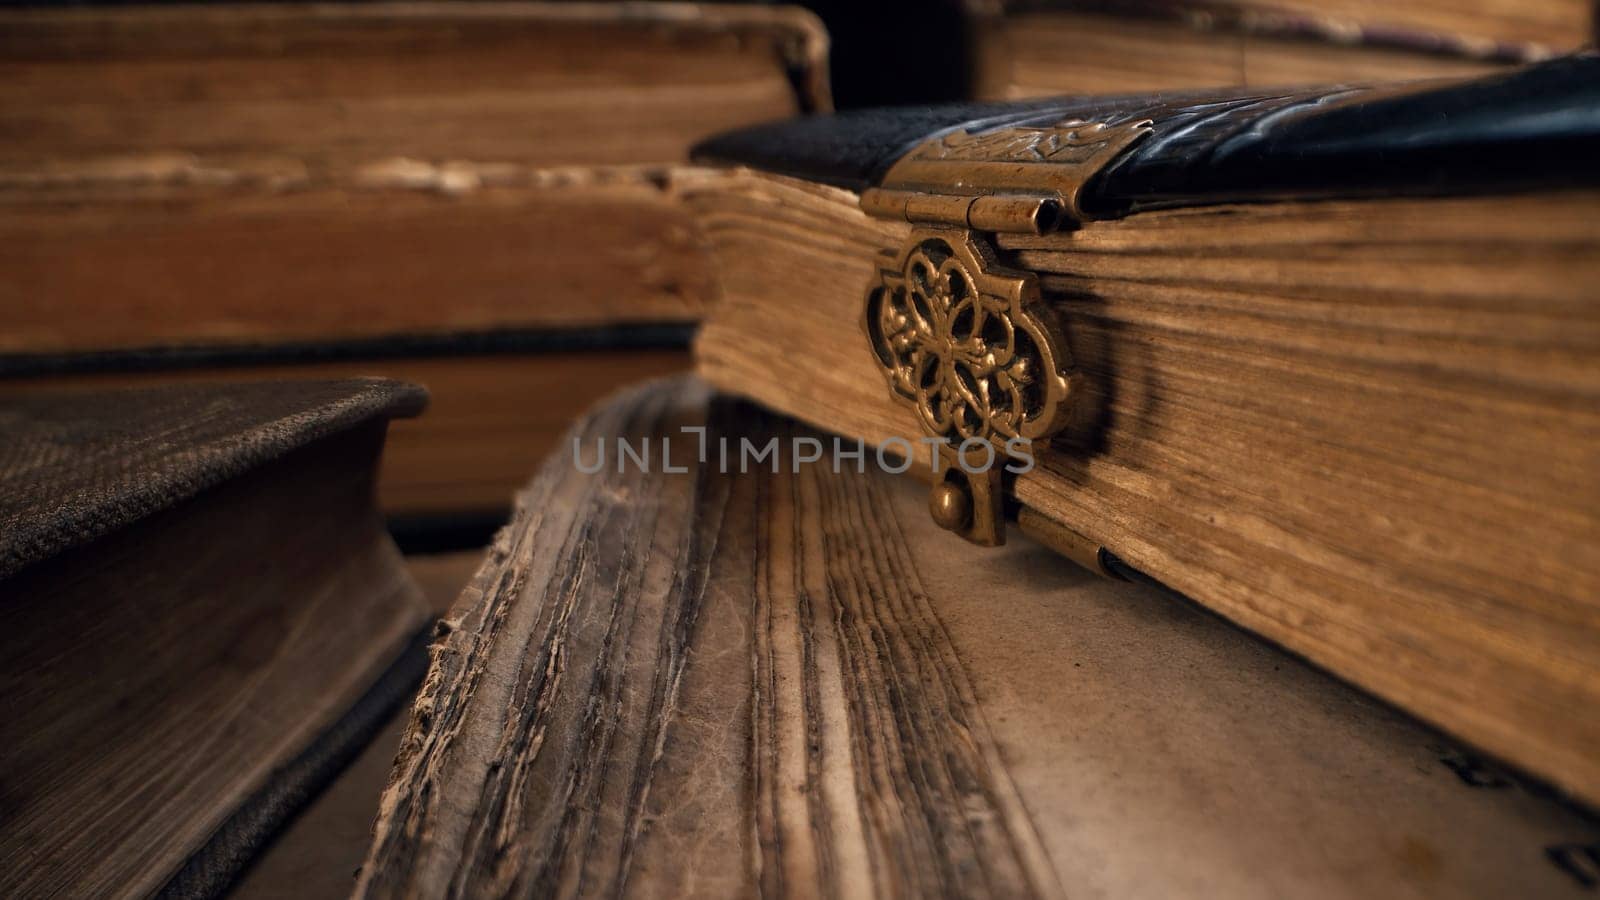 Macro view of saved medieval books with ancient writings. Religious literature, archival manuscripts, rare collection tomes, artifacts. High quality